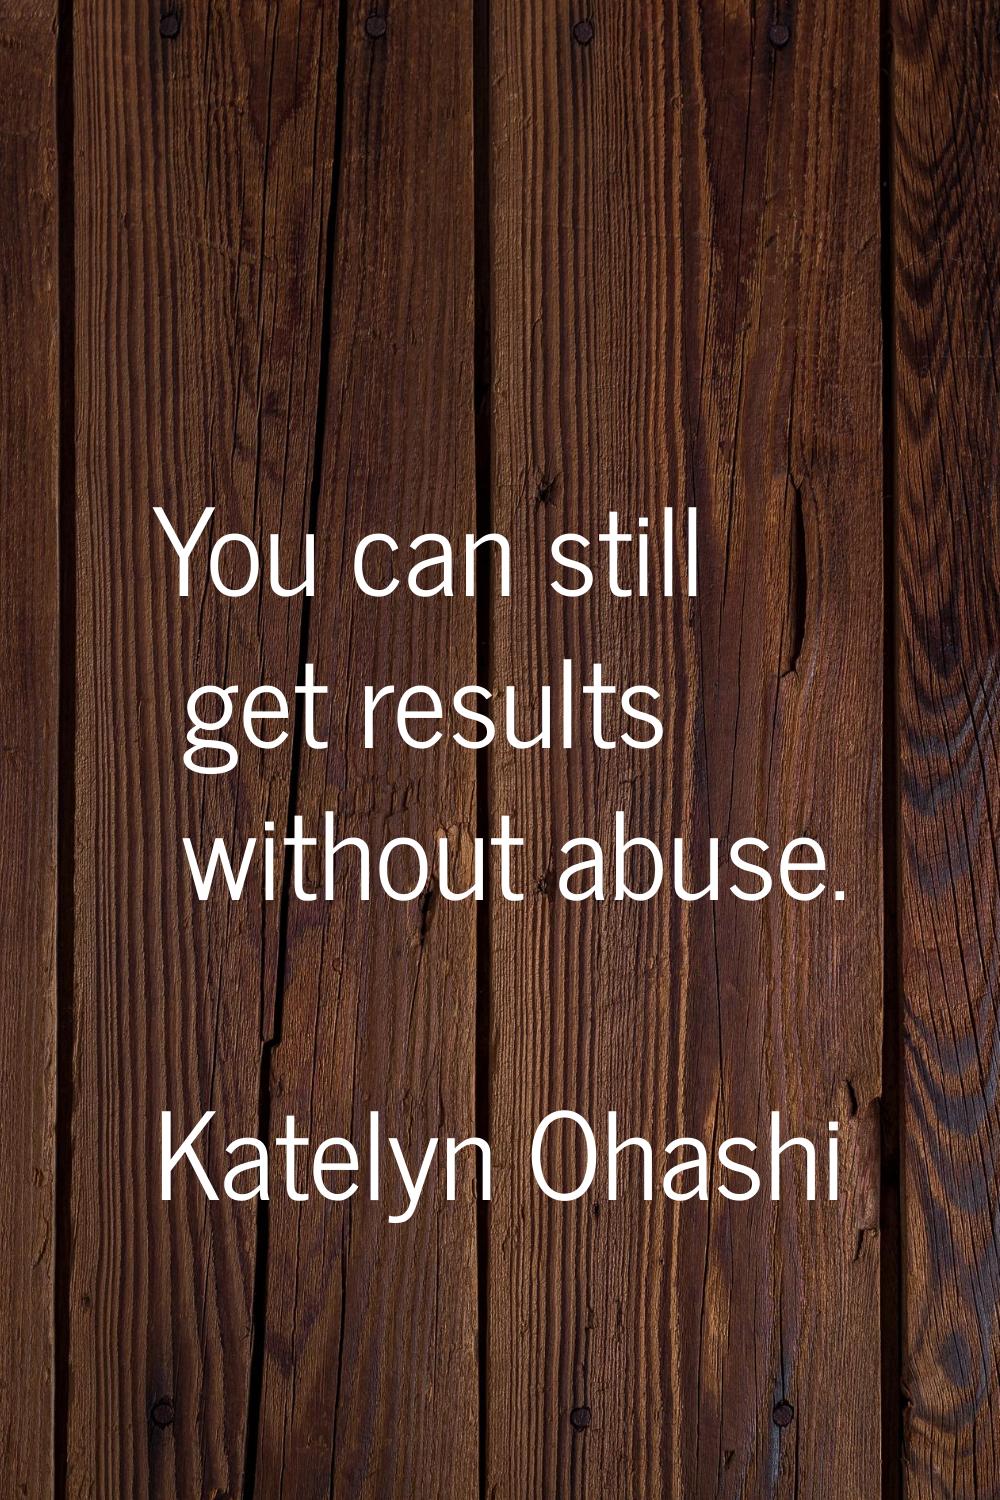 You can still get results without abuse.